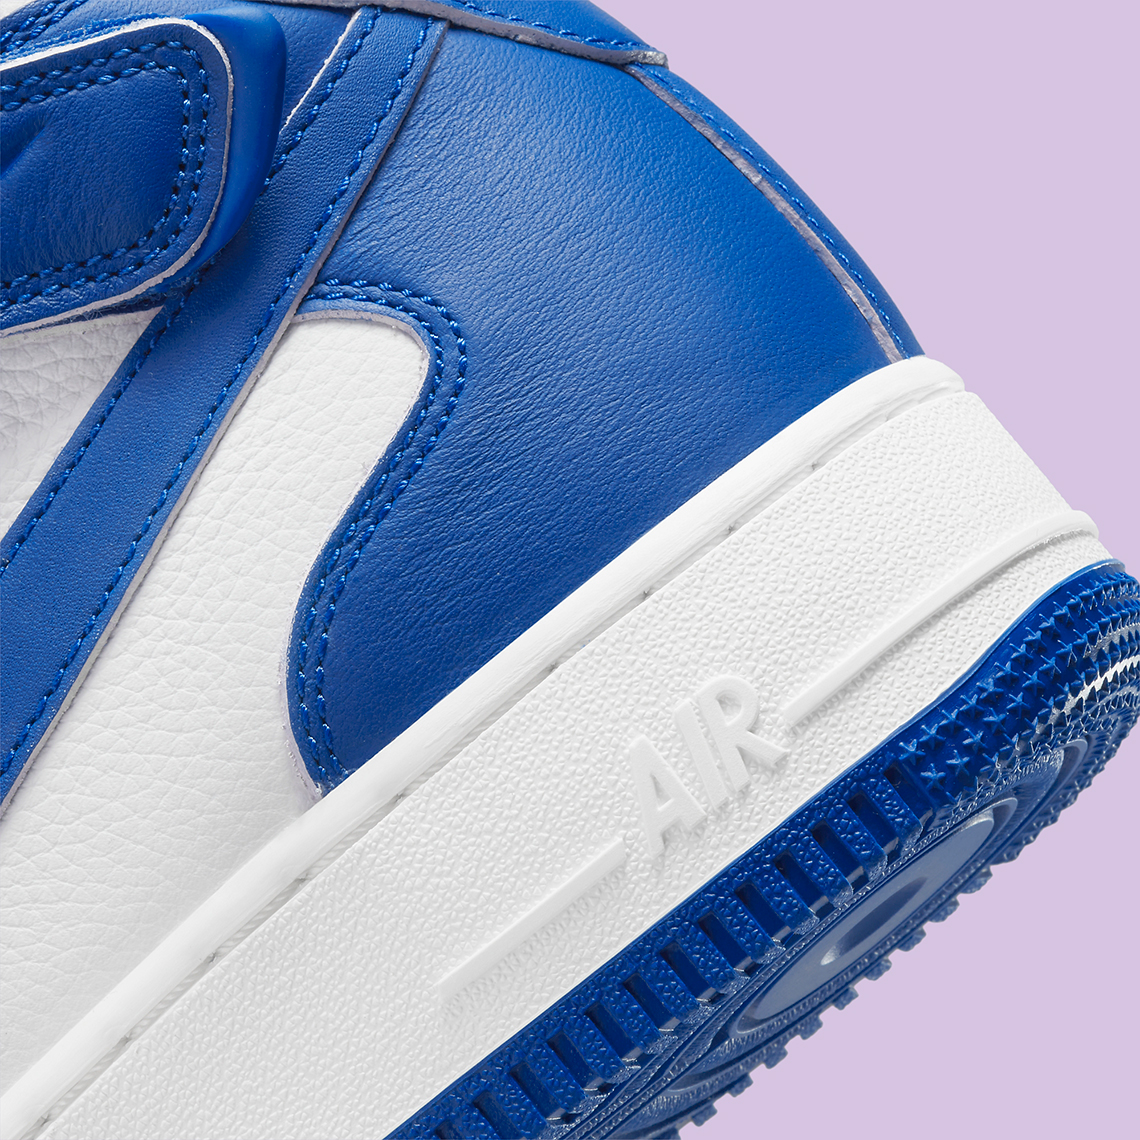 nike air force 1 mid royal blue white dx3721 100 9